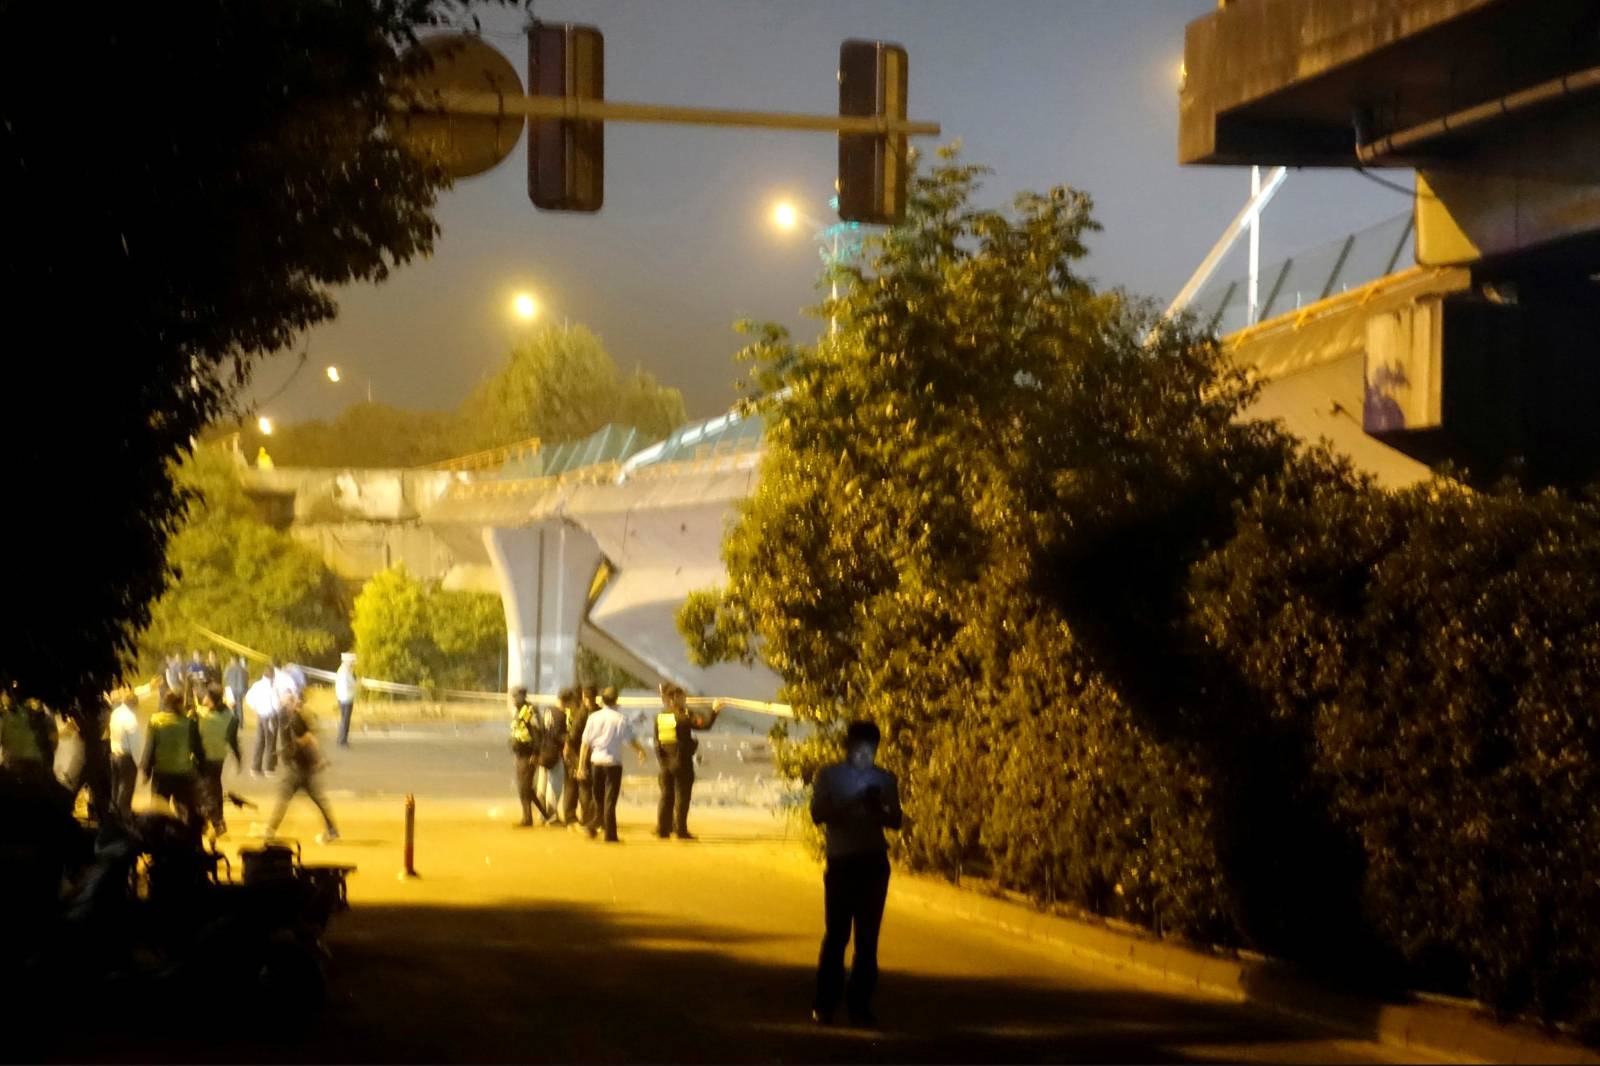 Police and rescue workers are seen next to a collapsed highway overpass in Wuxi, Jiangsu